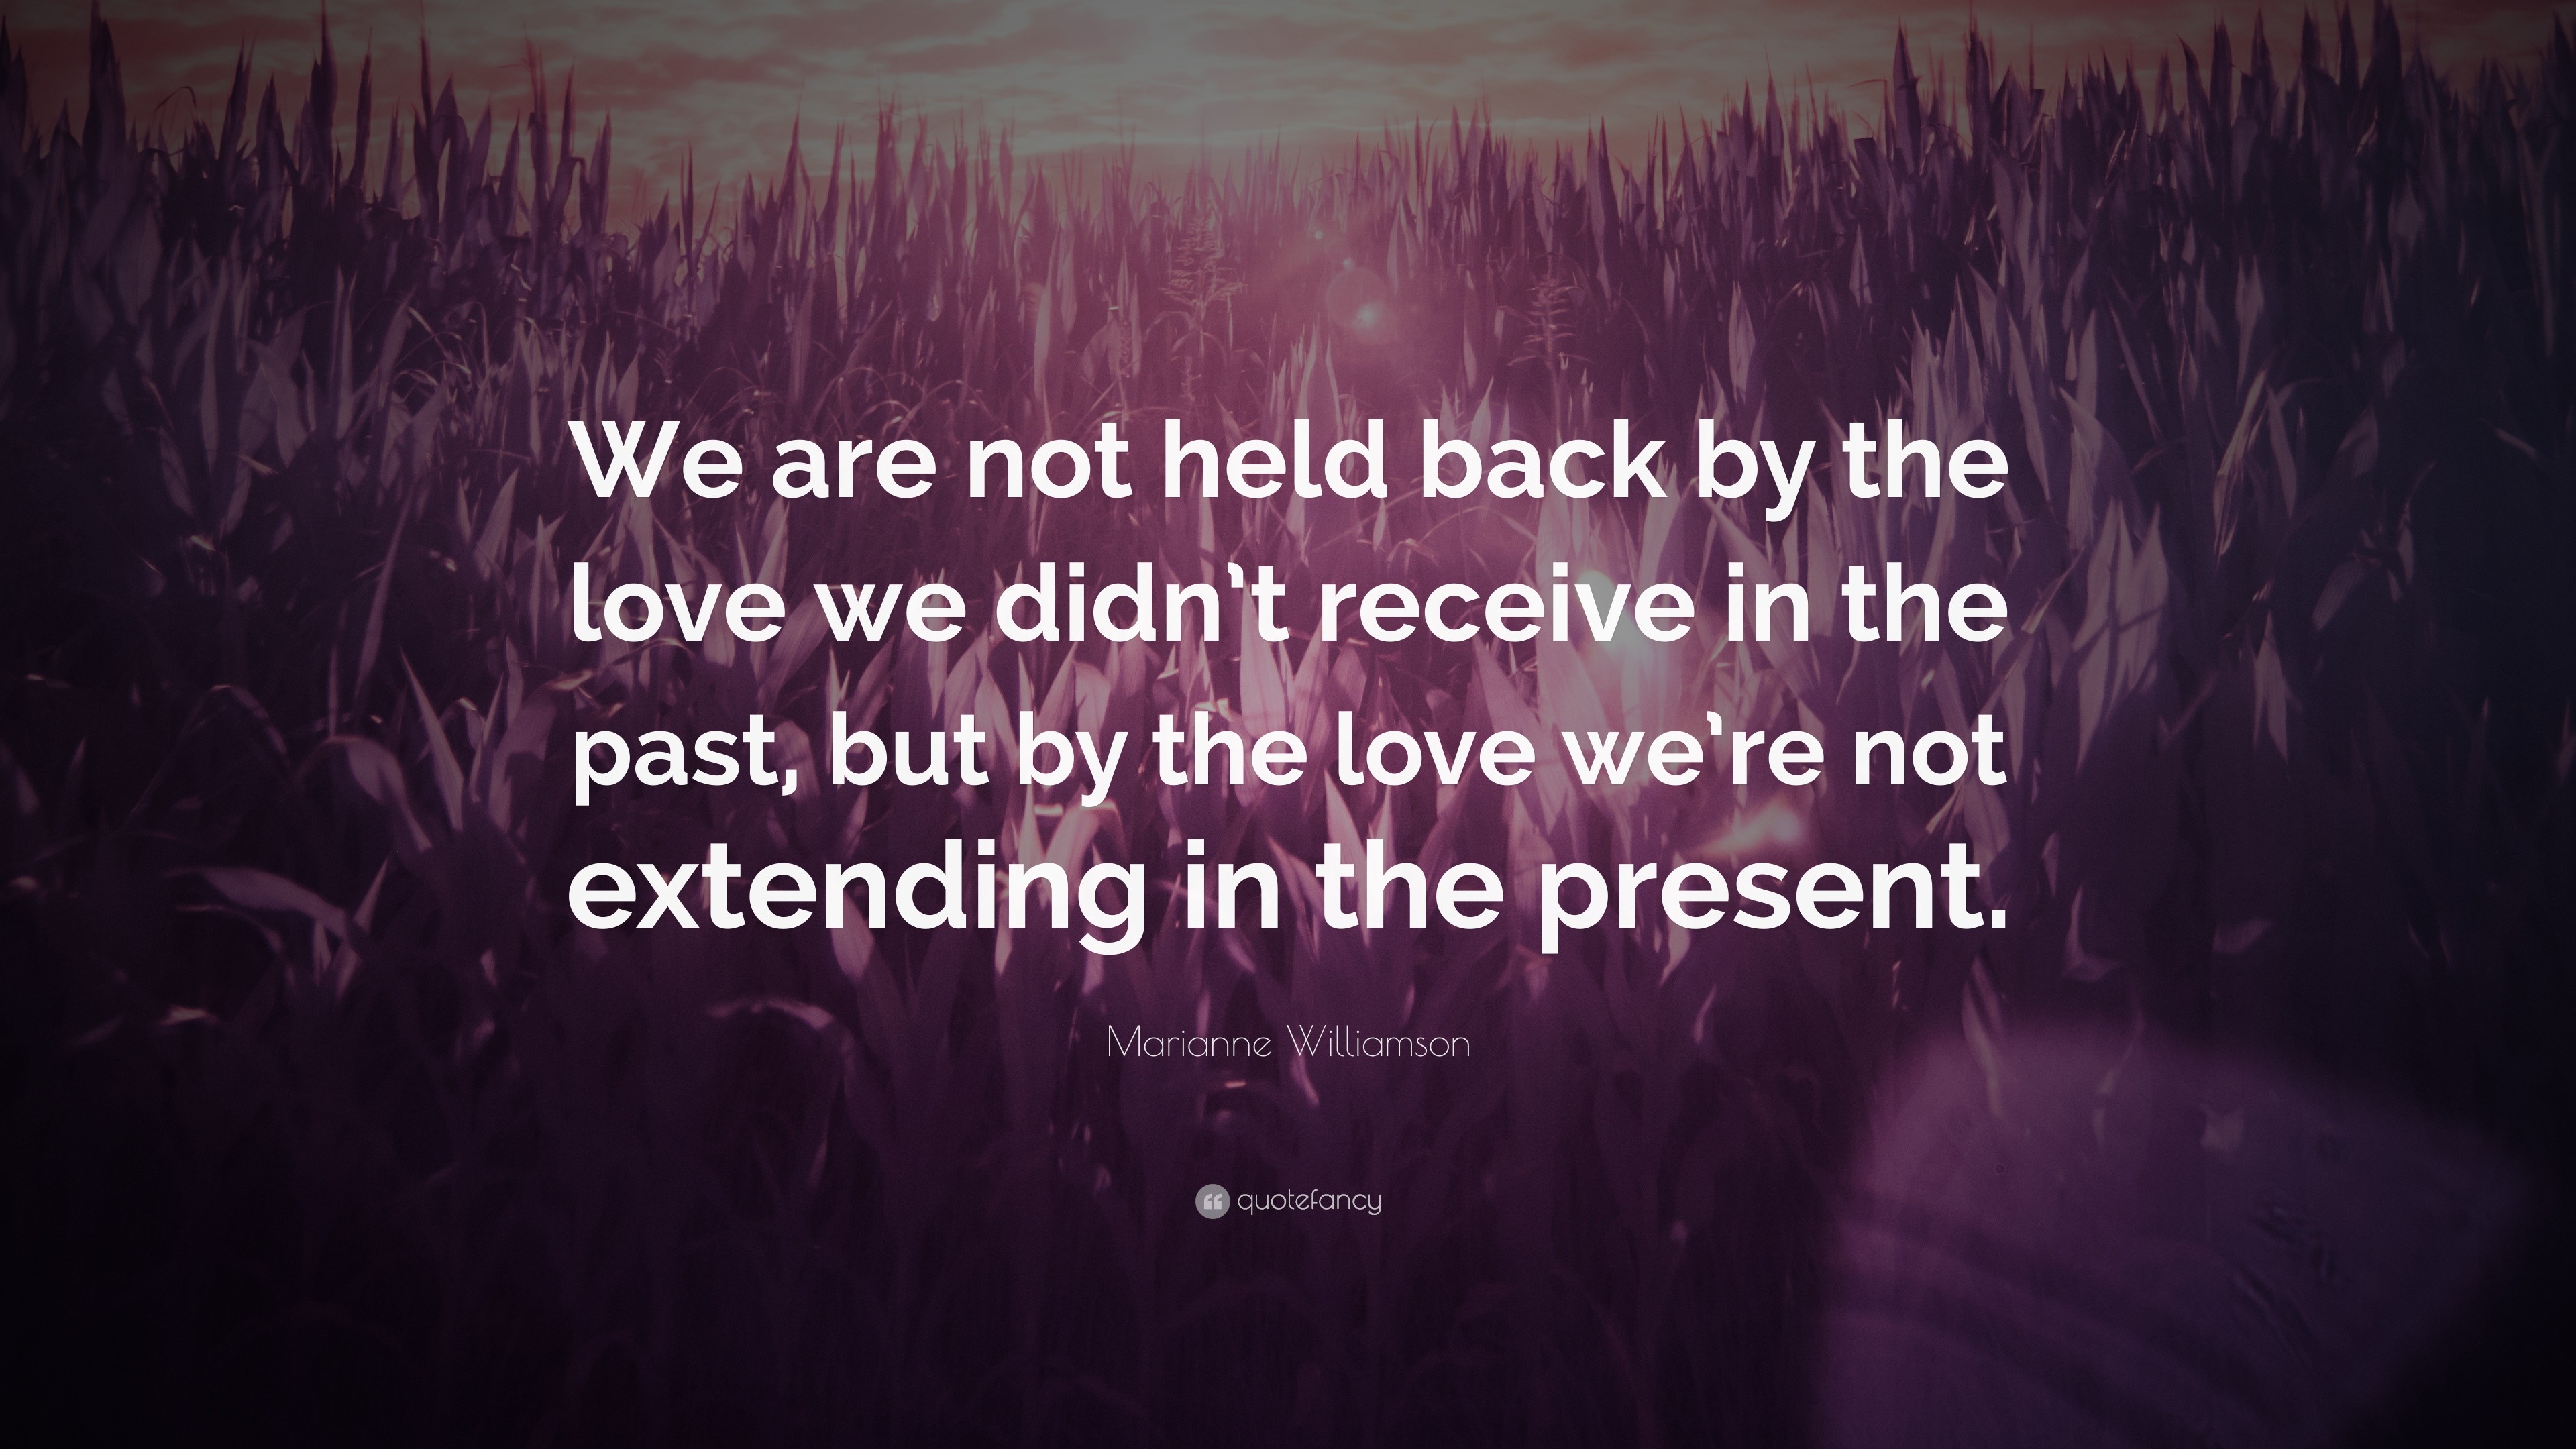 Marianne Williamson Quote: “We are not held back by the love we didn’t ...